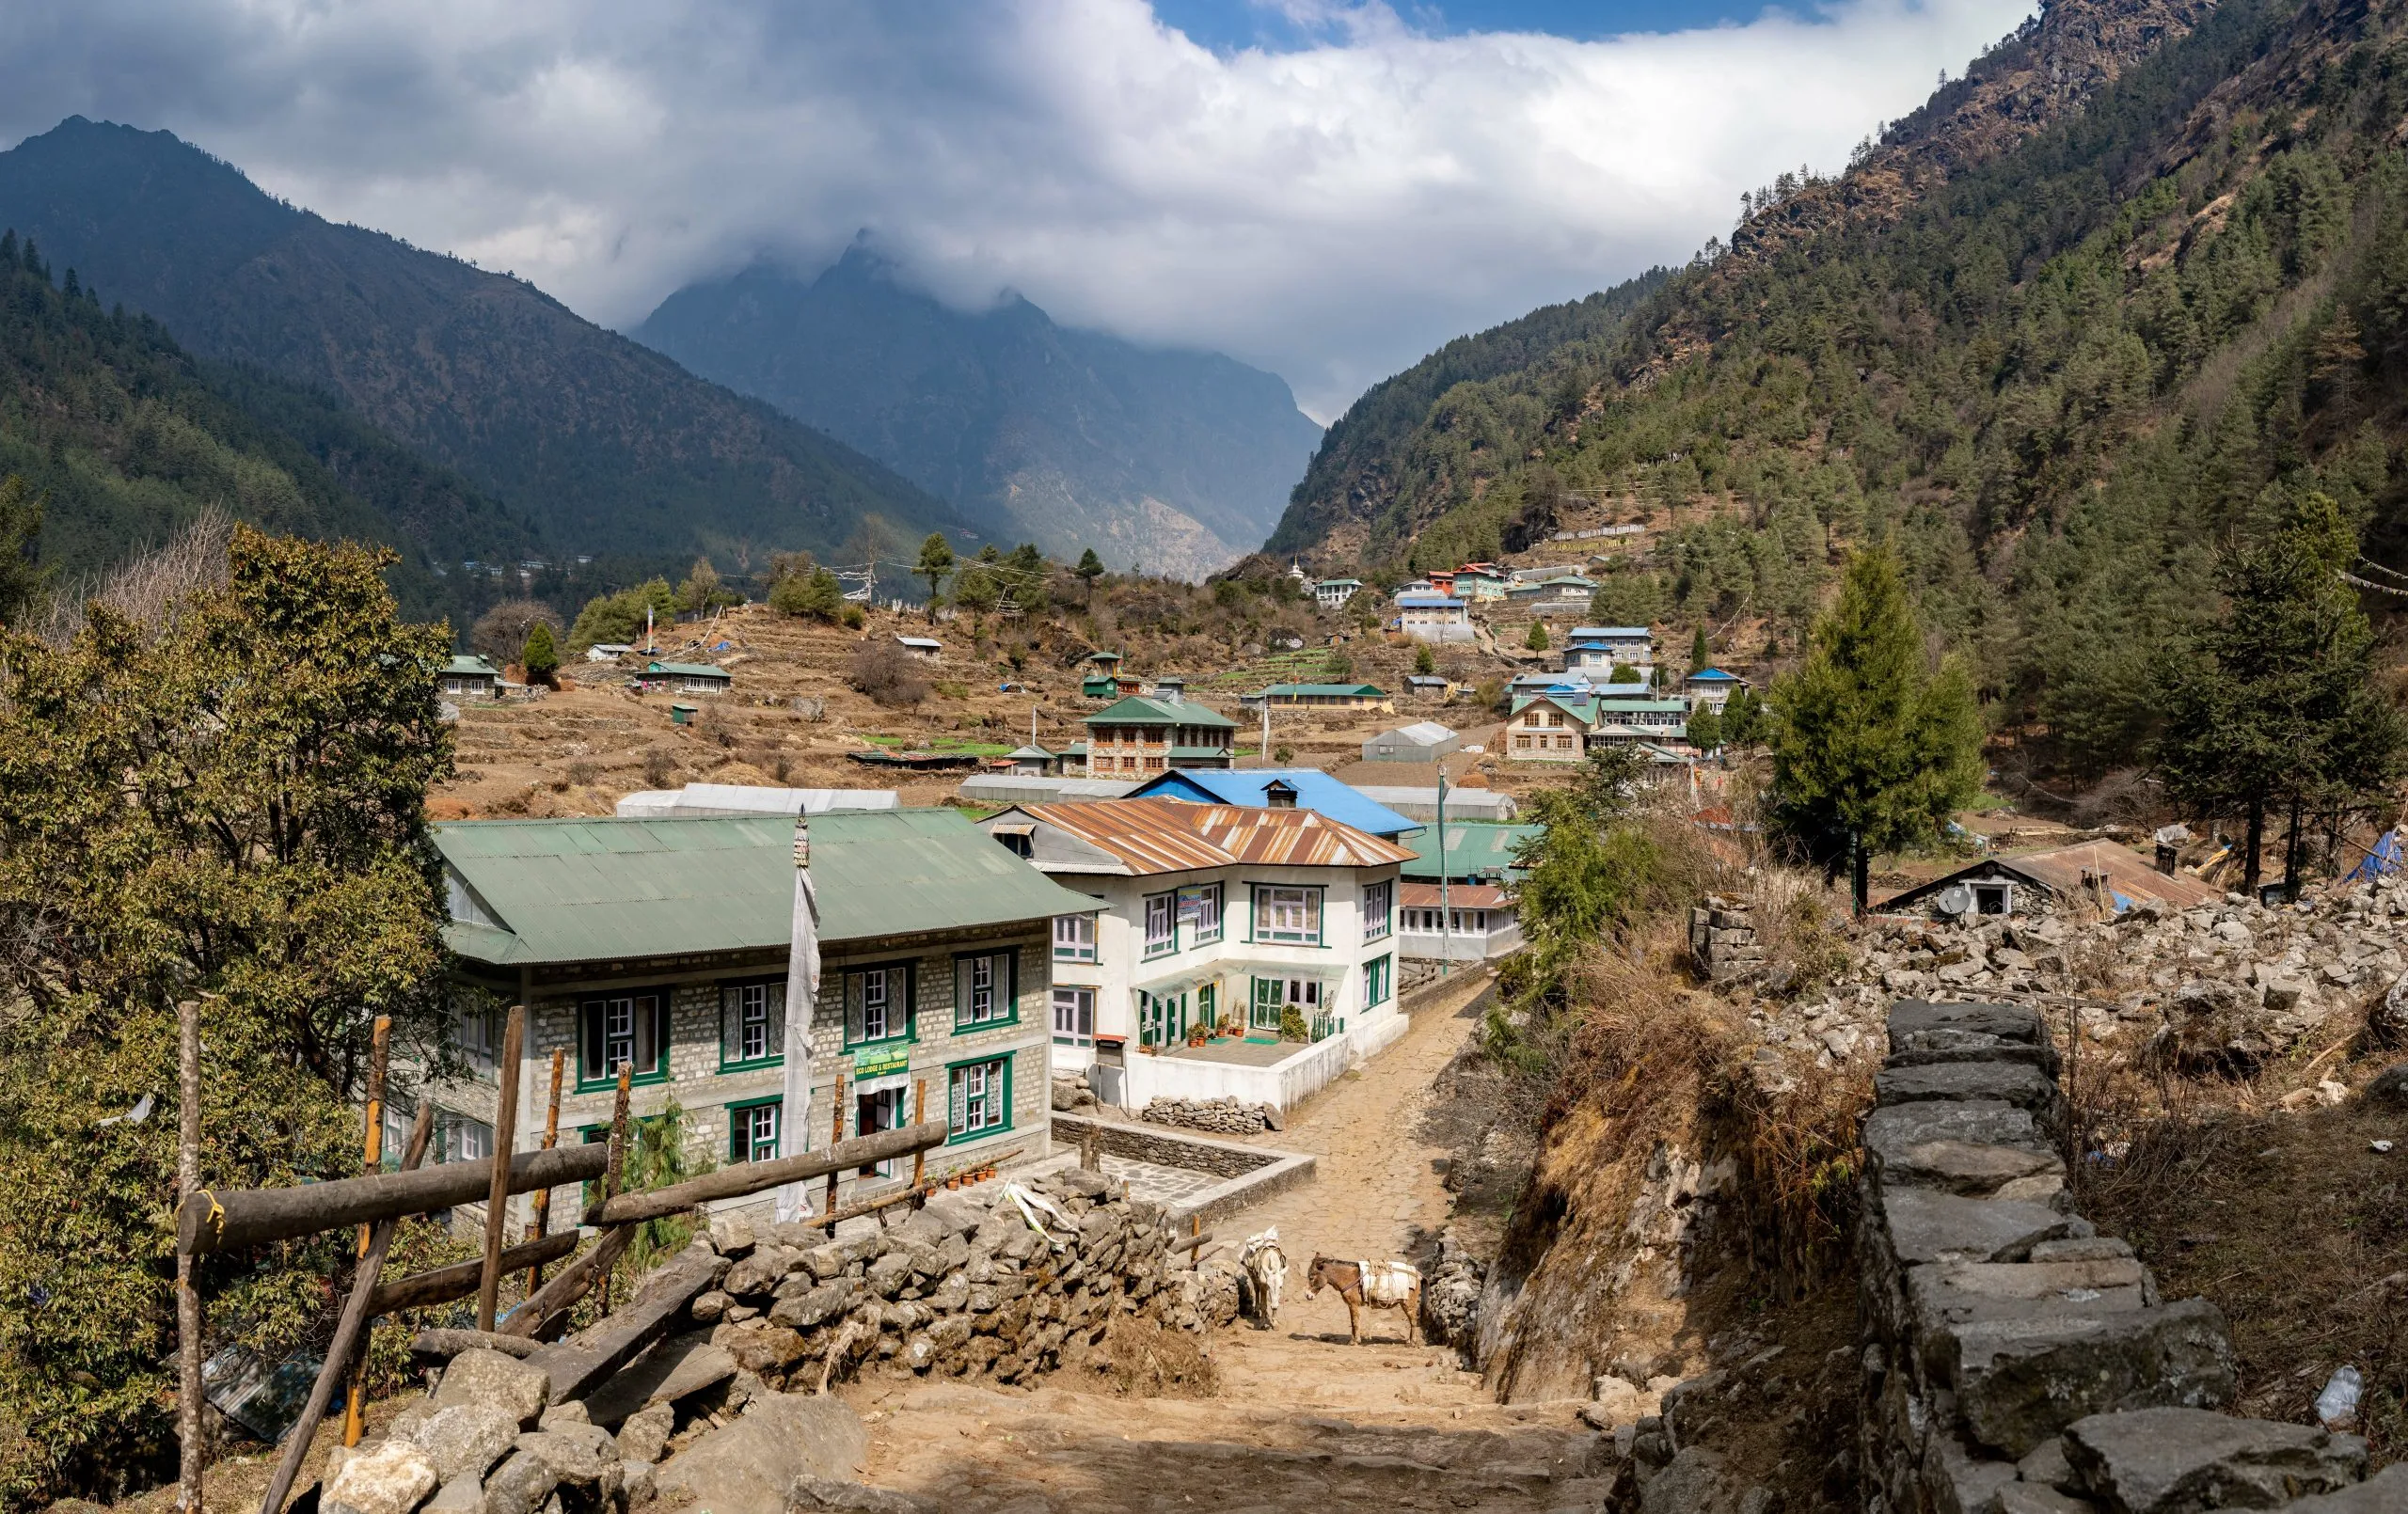 Trail from Lukla to Namche Bazaar